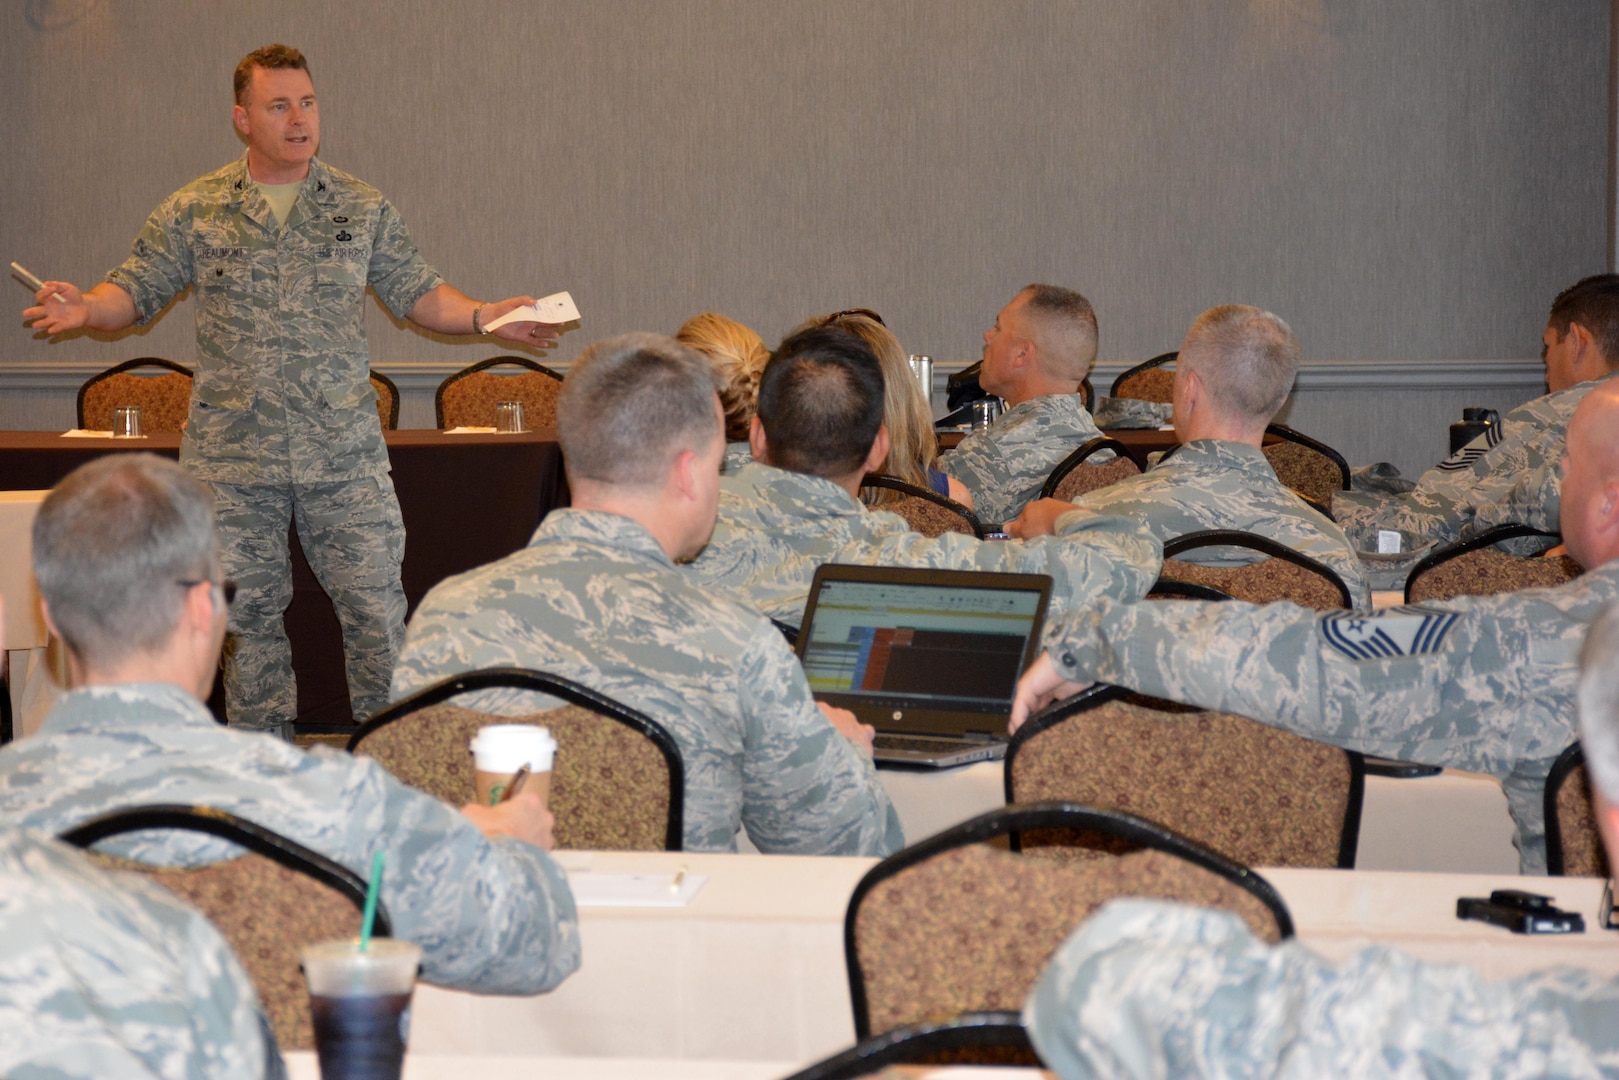 Col. Burke Beaumont talks with Air Force mission support group commanders and superintendents during a resource management panel discussion at the Air Force Installation and Mission Support Center Mission Support Leadership Summit May 16 in San Antonio. Nearly 200 military and civilian Airmen participated in briefings, panel discussions and networking sessions to gain in-depth insight about the more than 150 centralized capabilities the center executes for the Air Force.